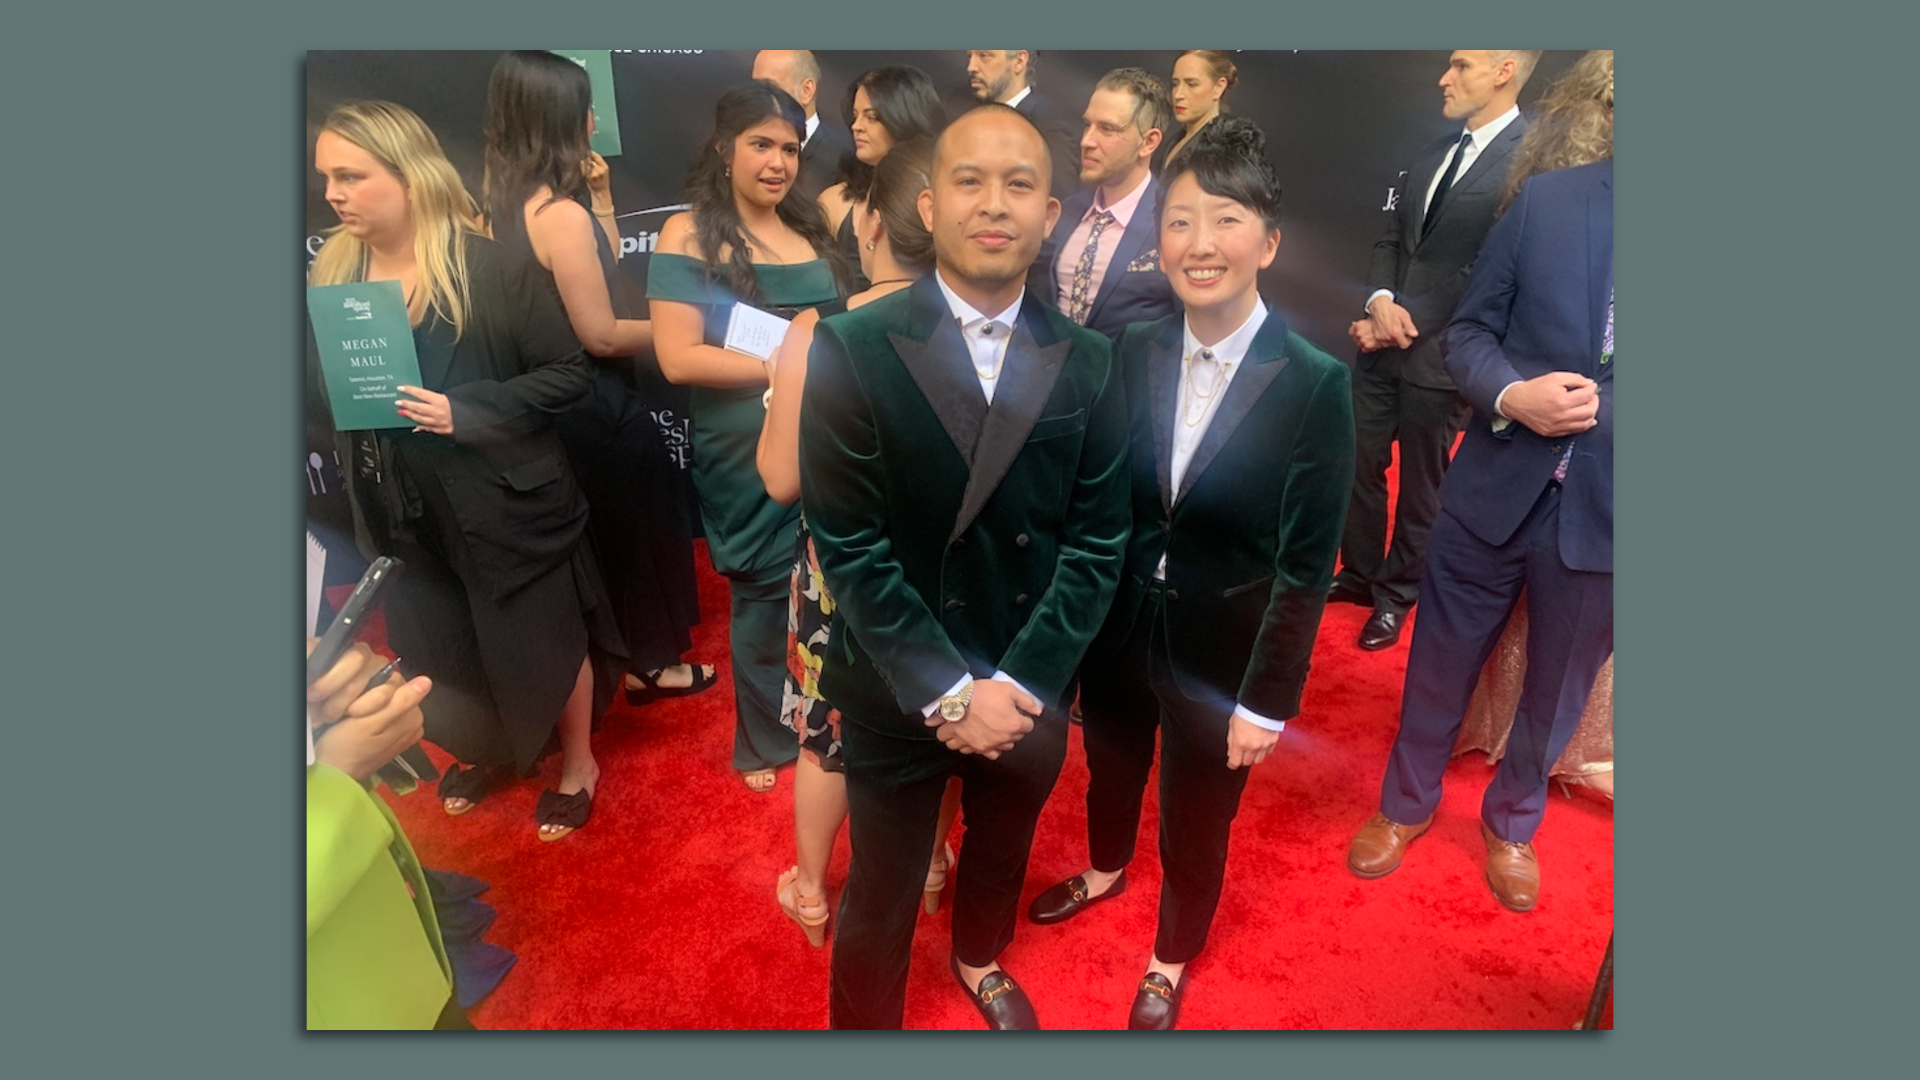 Kasama co-owners Tim Flores and Genie Kwong post on the red carpet in matching green velvet suits.